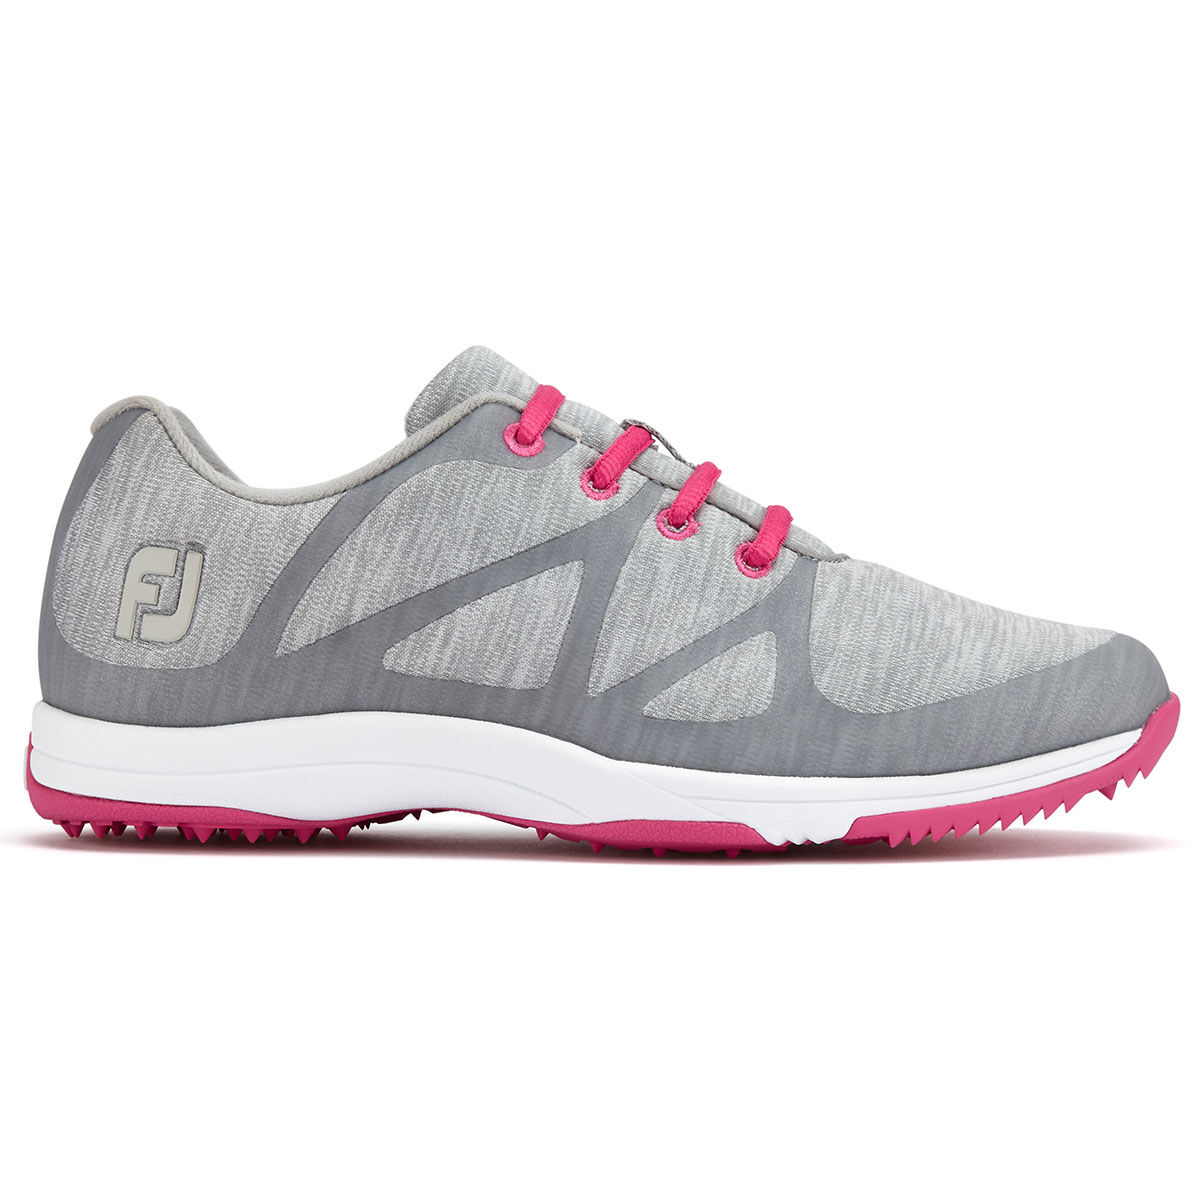 FootJoy Leisure Ladies Shoes from 